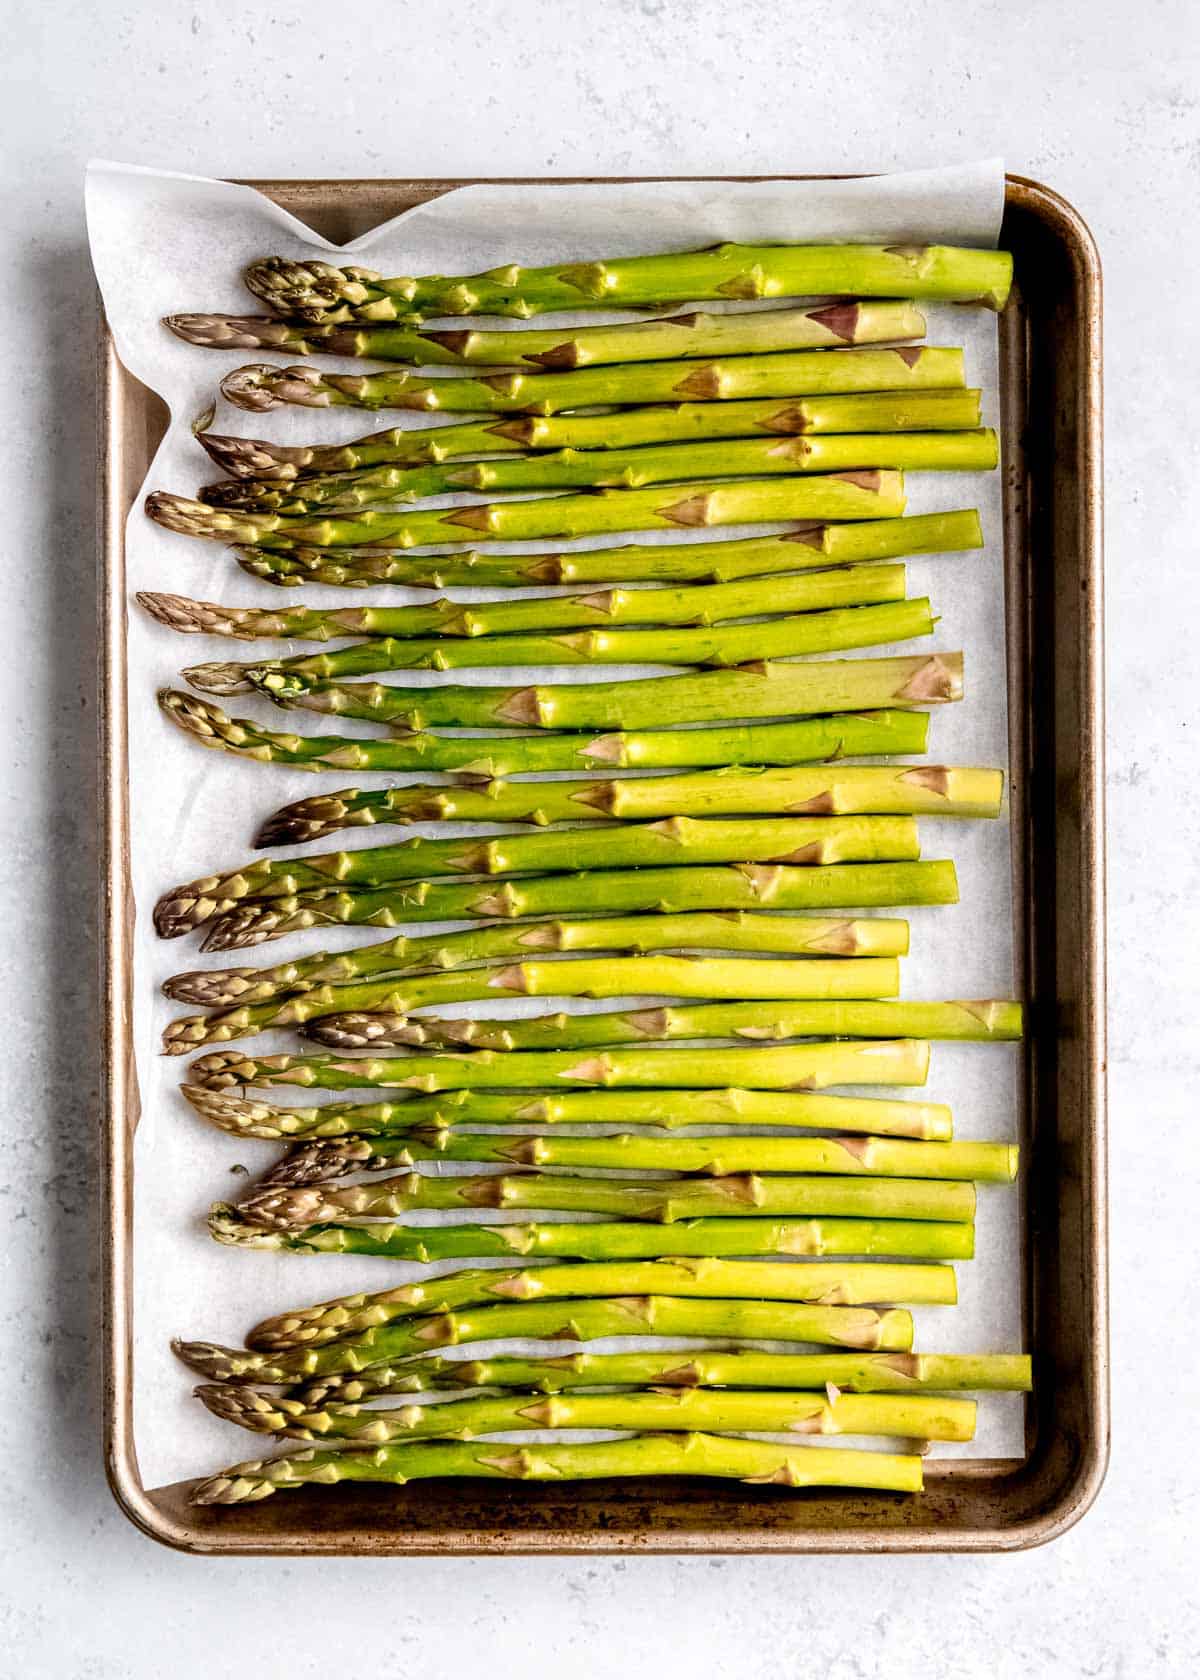 asparagus spread out on a baking sheet